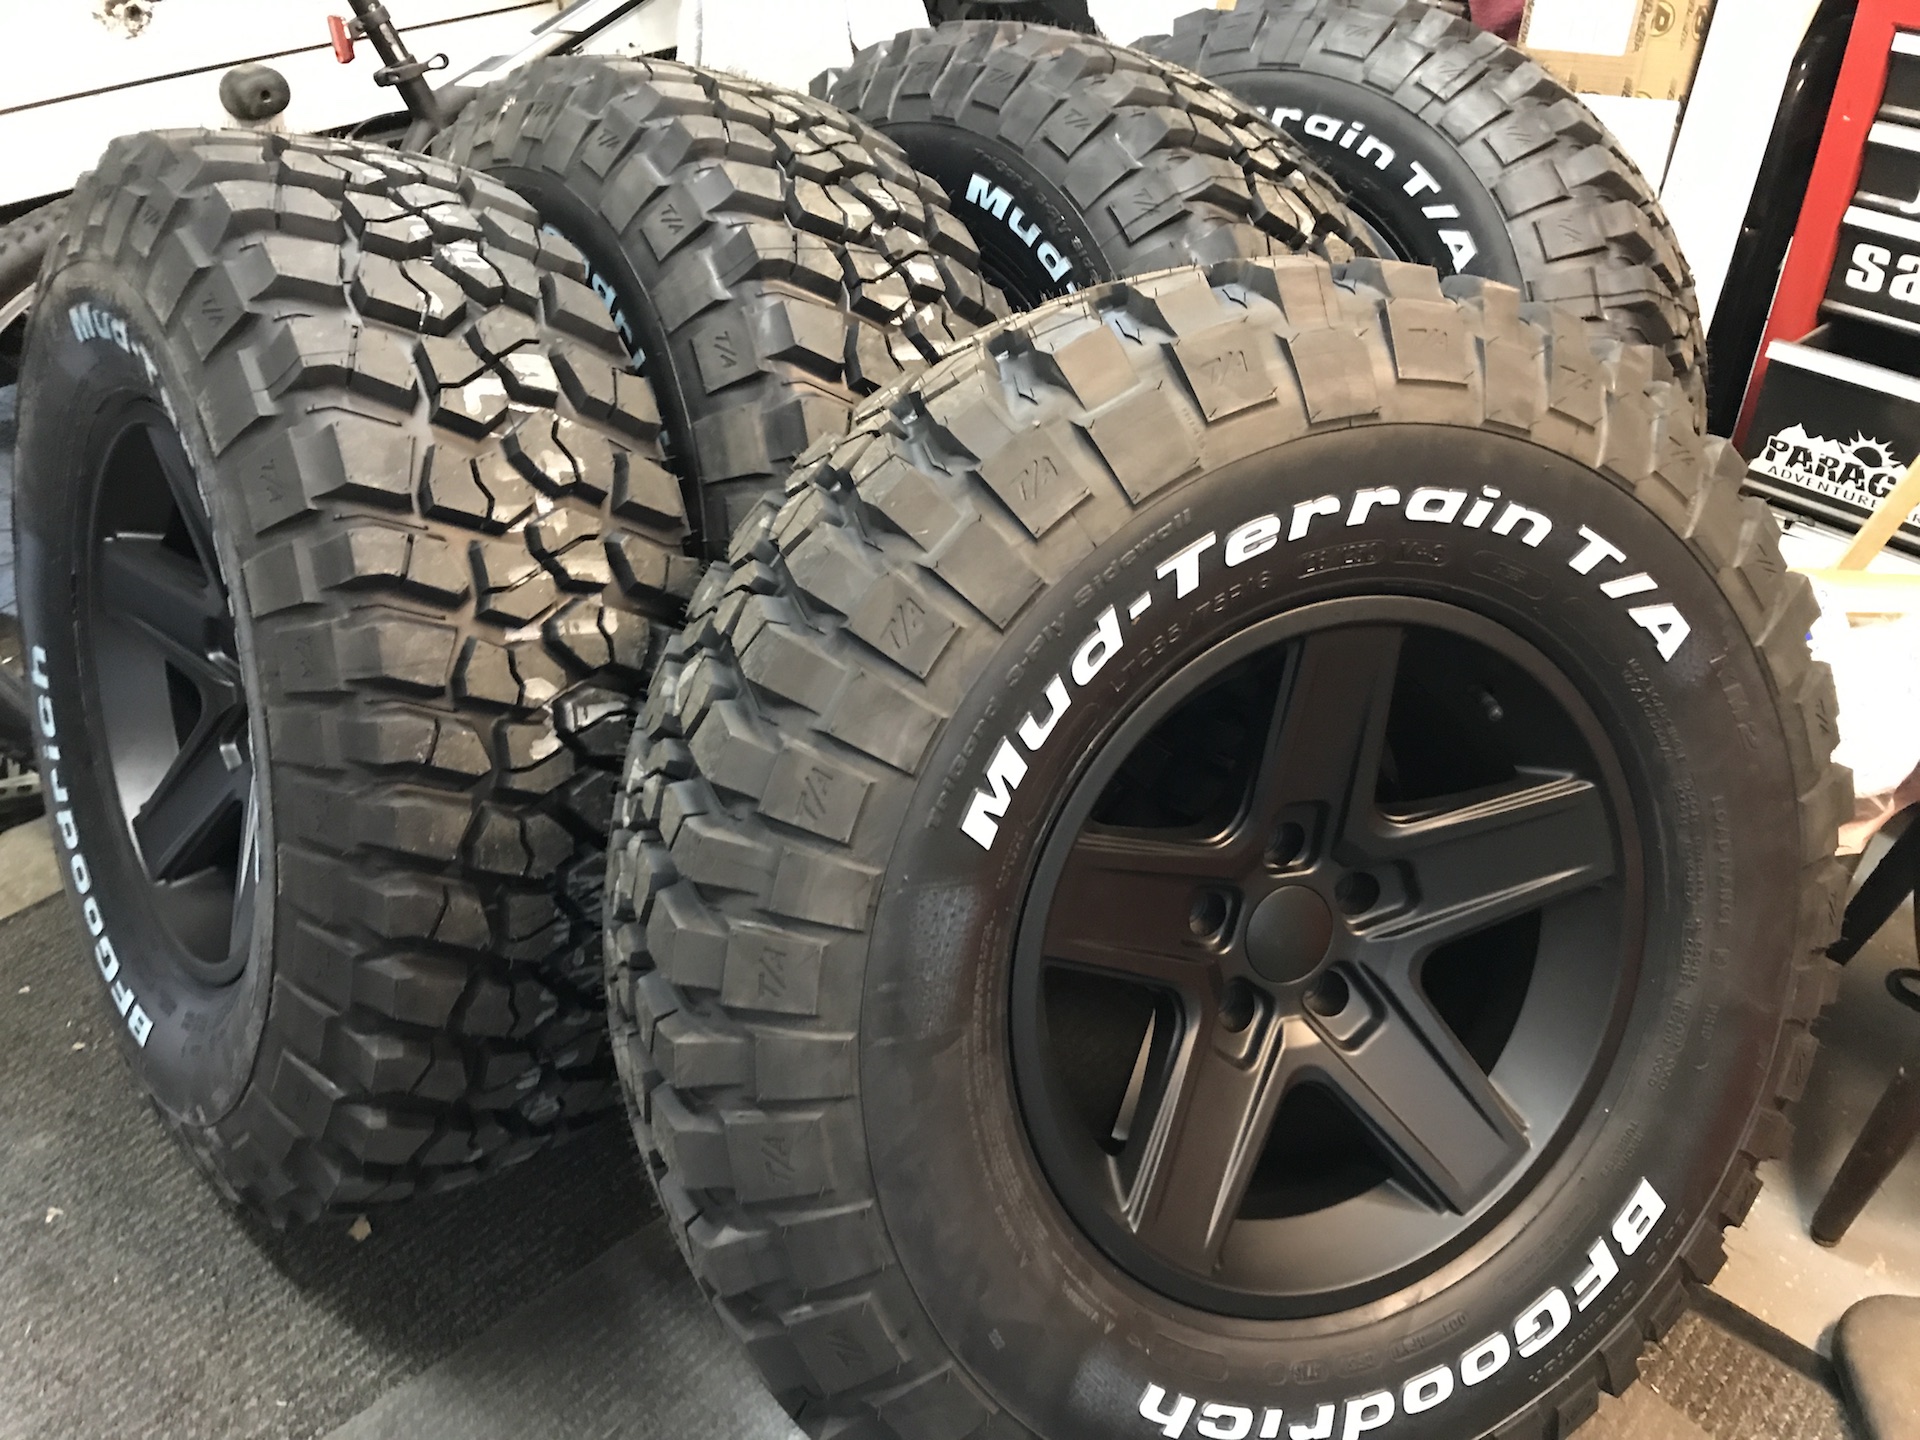 285-75-R16 BFGoodrich Tires with No Lift.